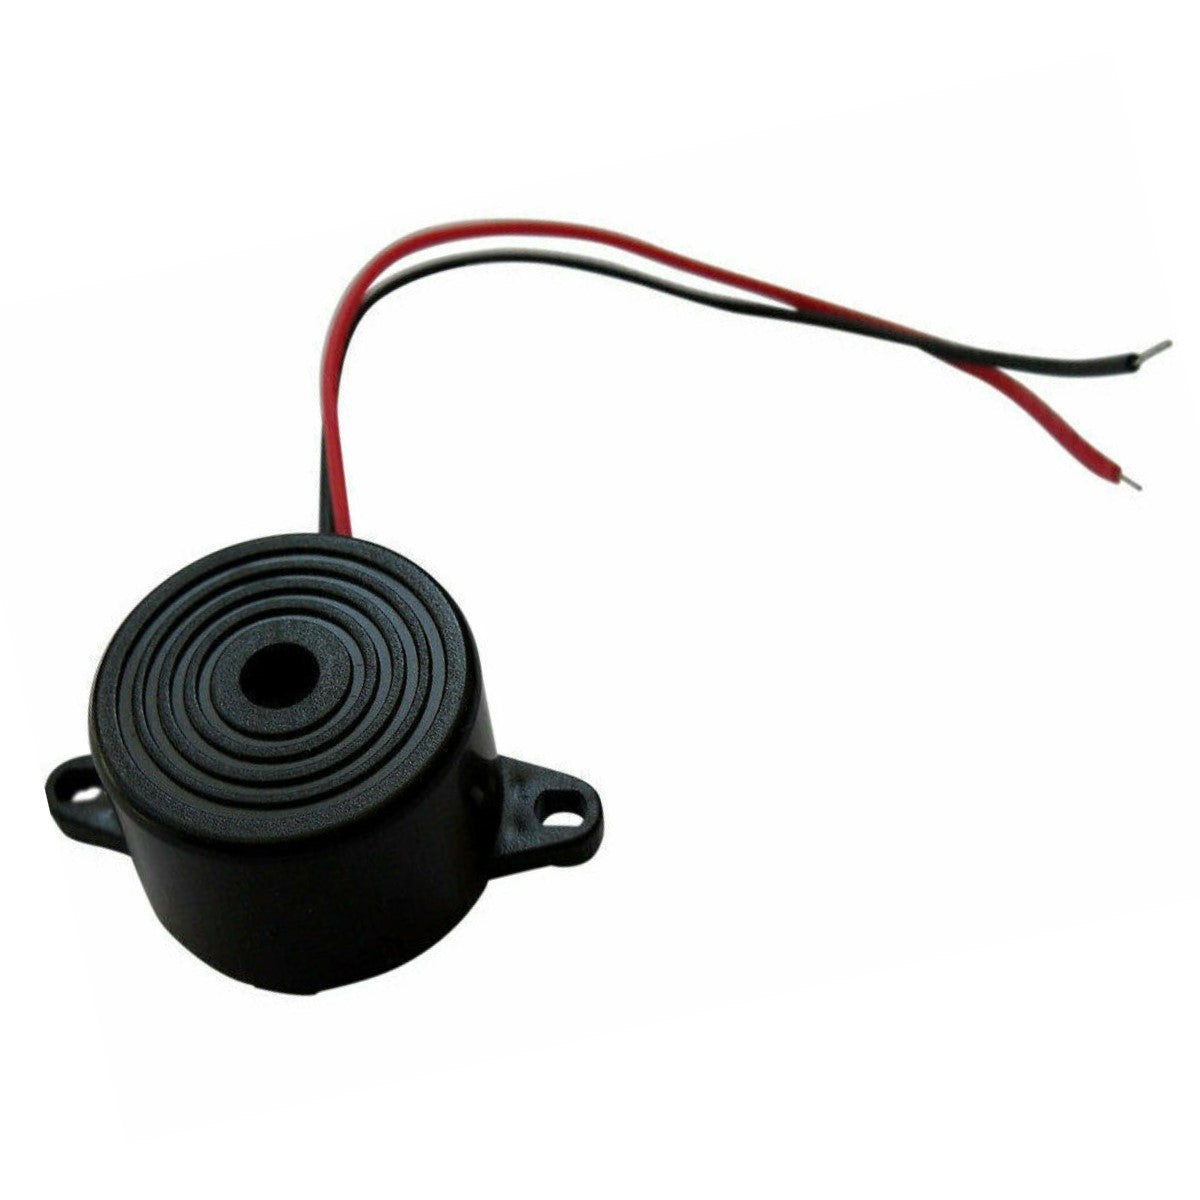 LPG CNG GPL BUZZER BEEPER FOR GAS AUTOGAS SYSTEMS AC STAG,KME,ATIKER,OTHERS